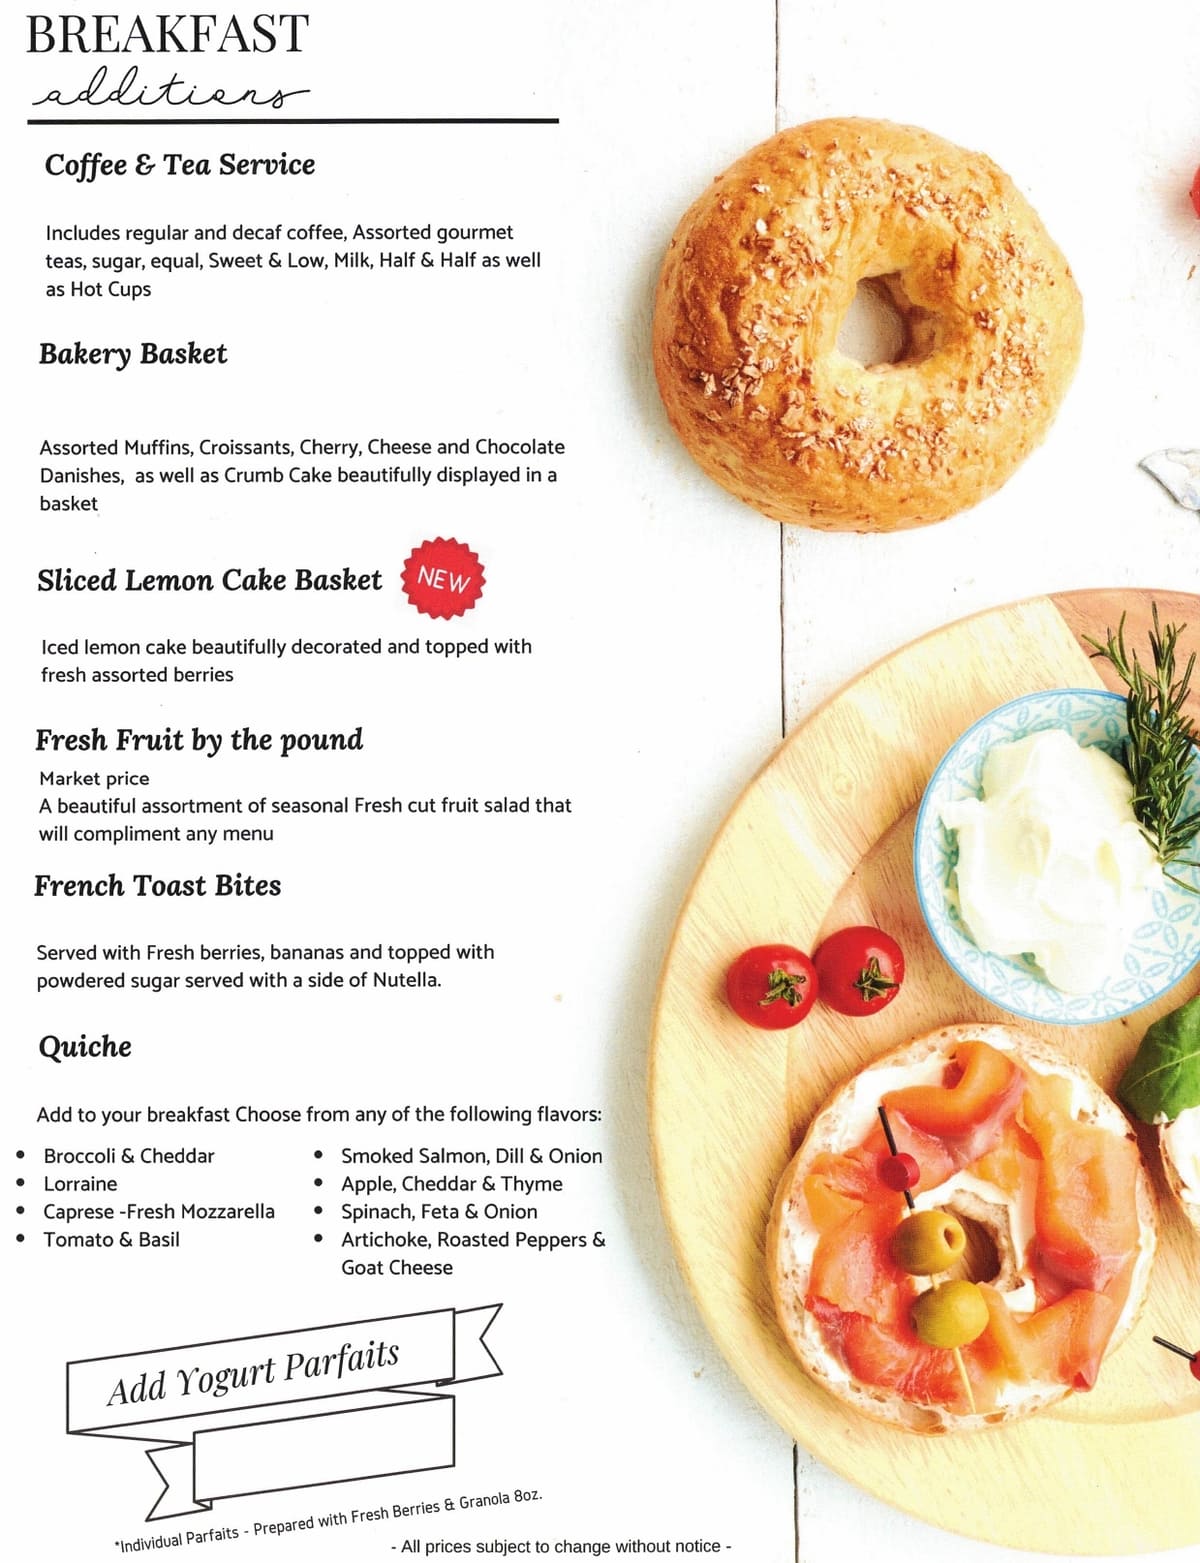 Catering Menu - Breakfast Additions